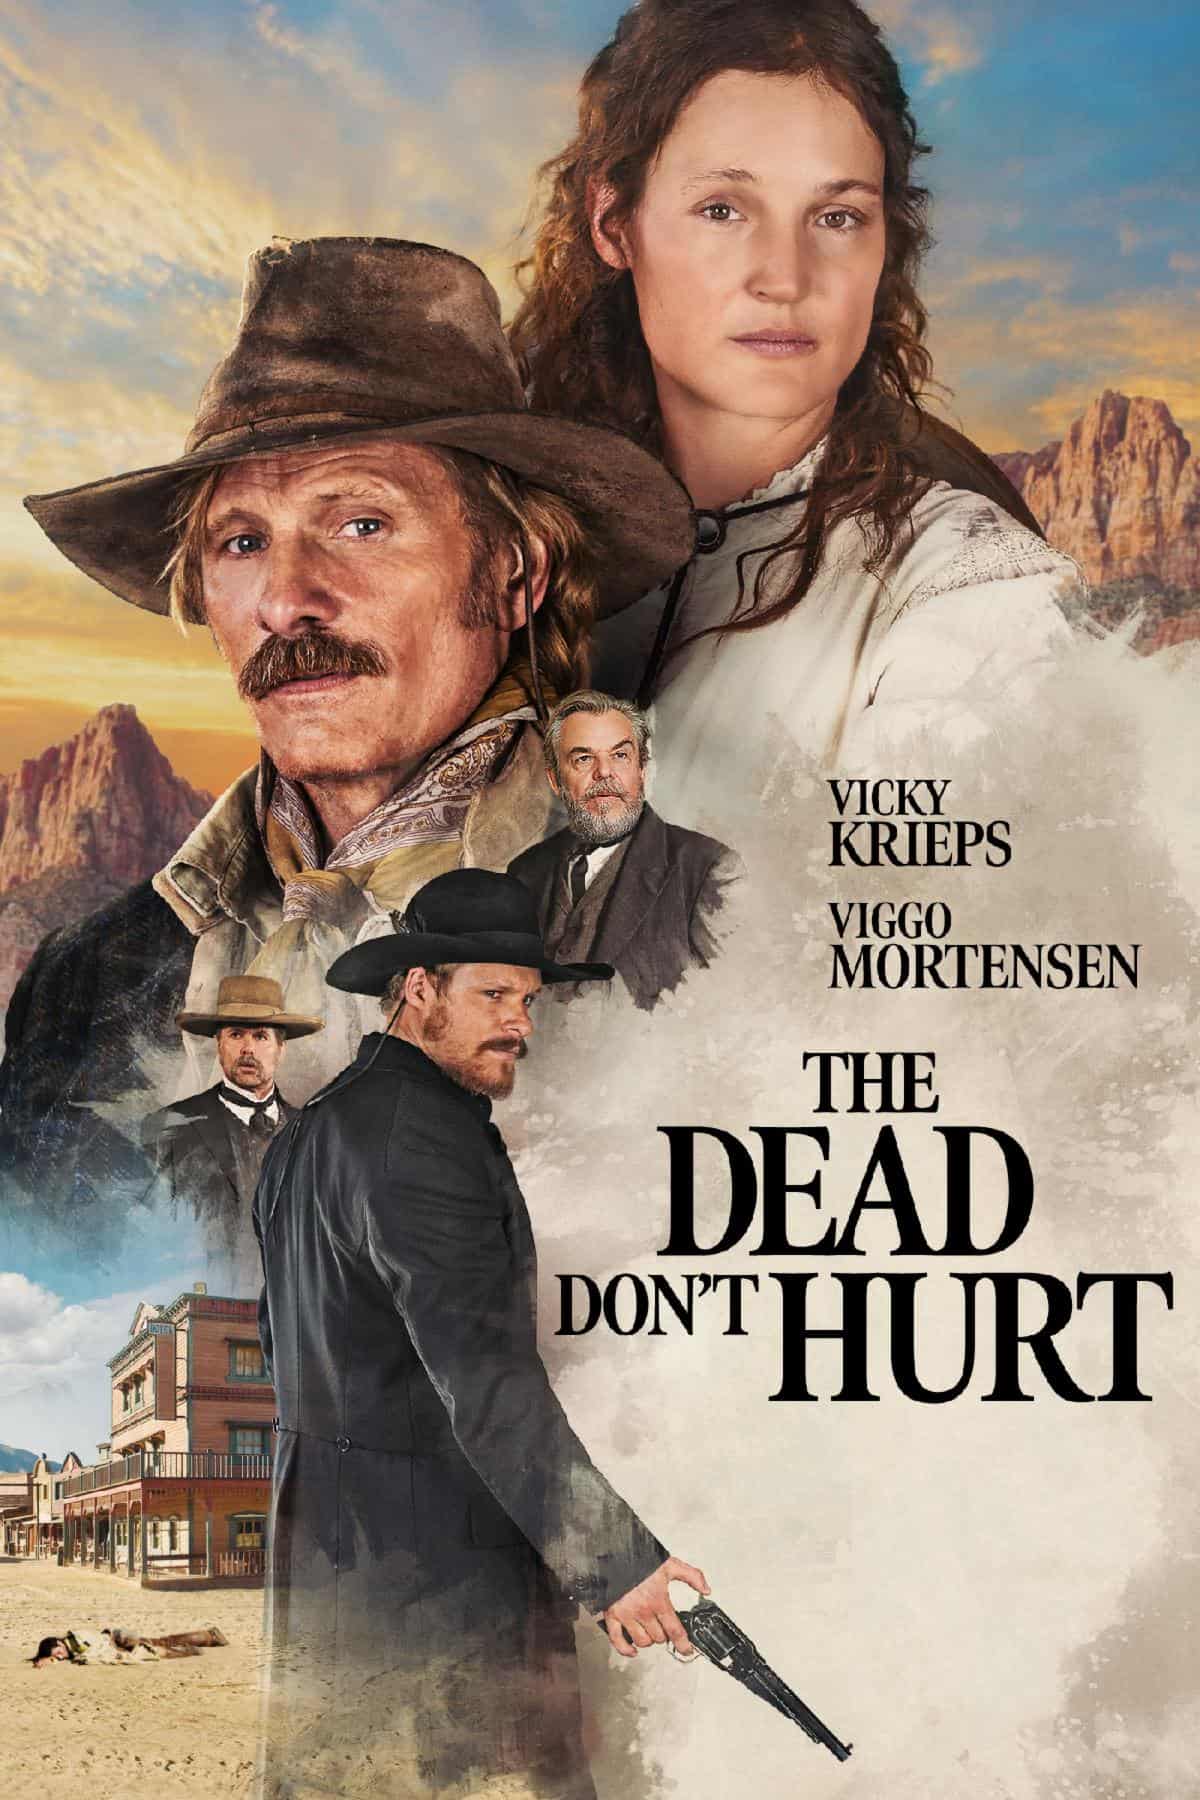 The Dead Don't Hurt Available for Digital Purchase July 16 and Digital Rental July 23 from Shout! Studios 1